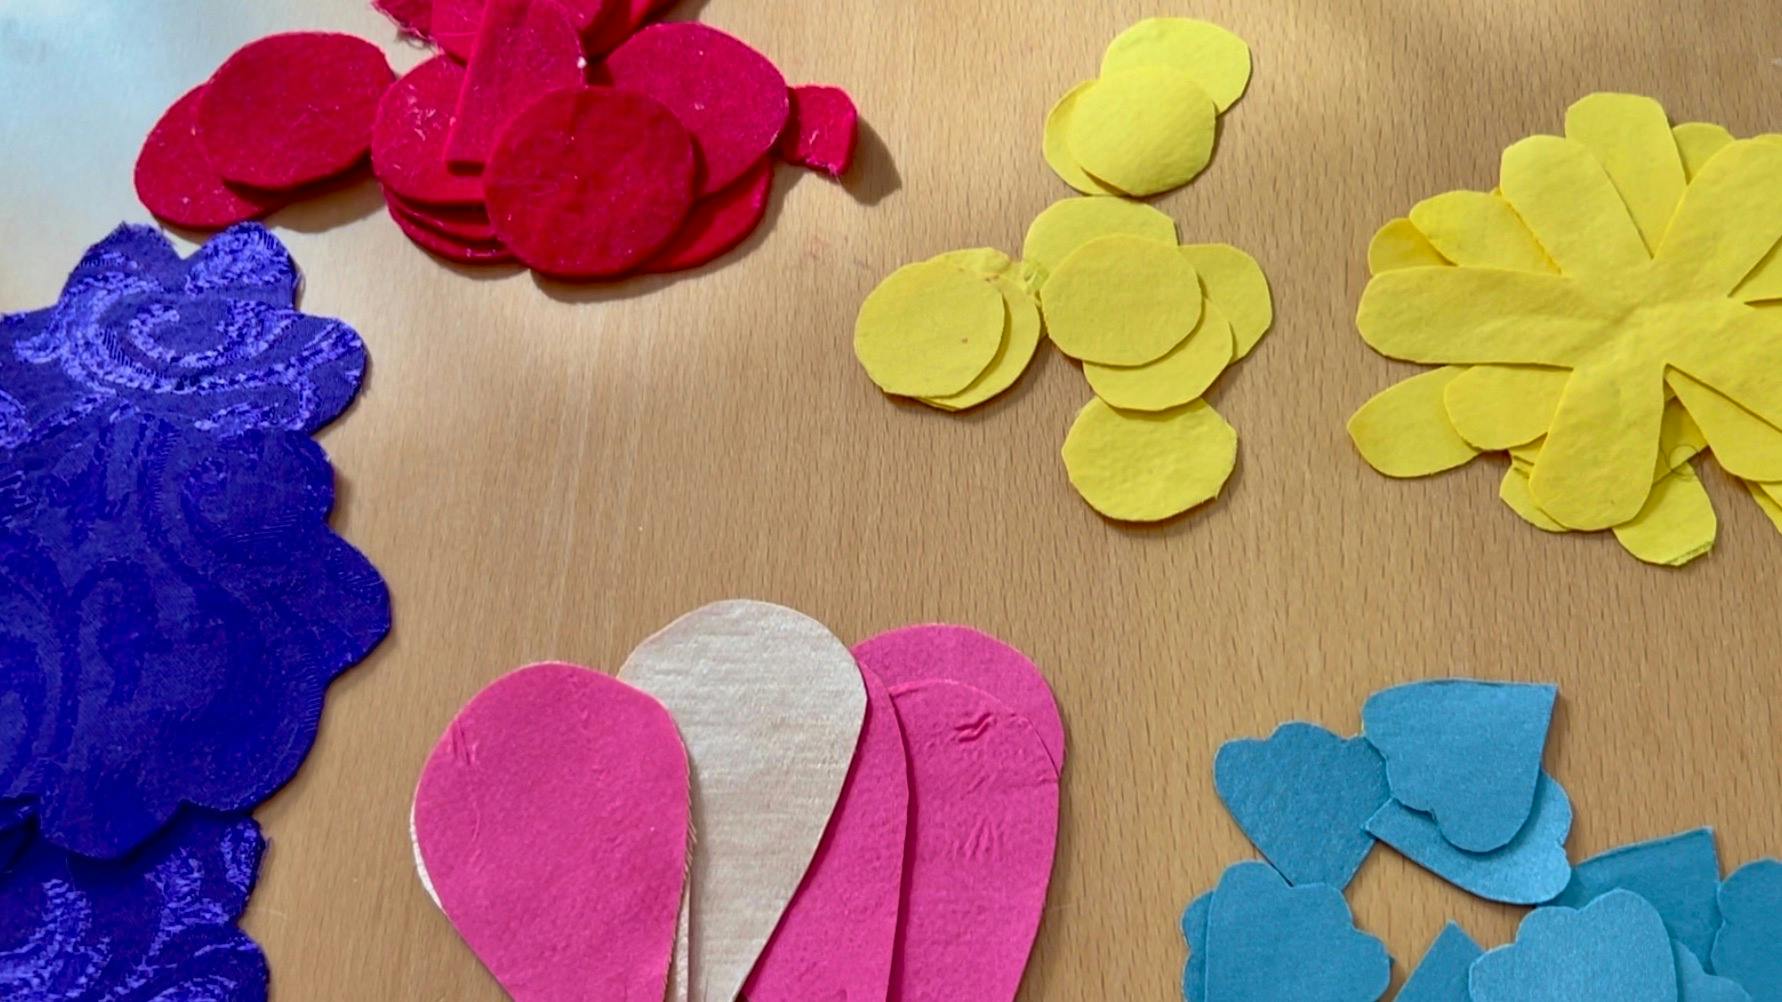 Stacks of cut out petals in multiple colors.